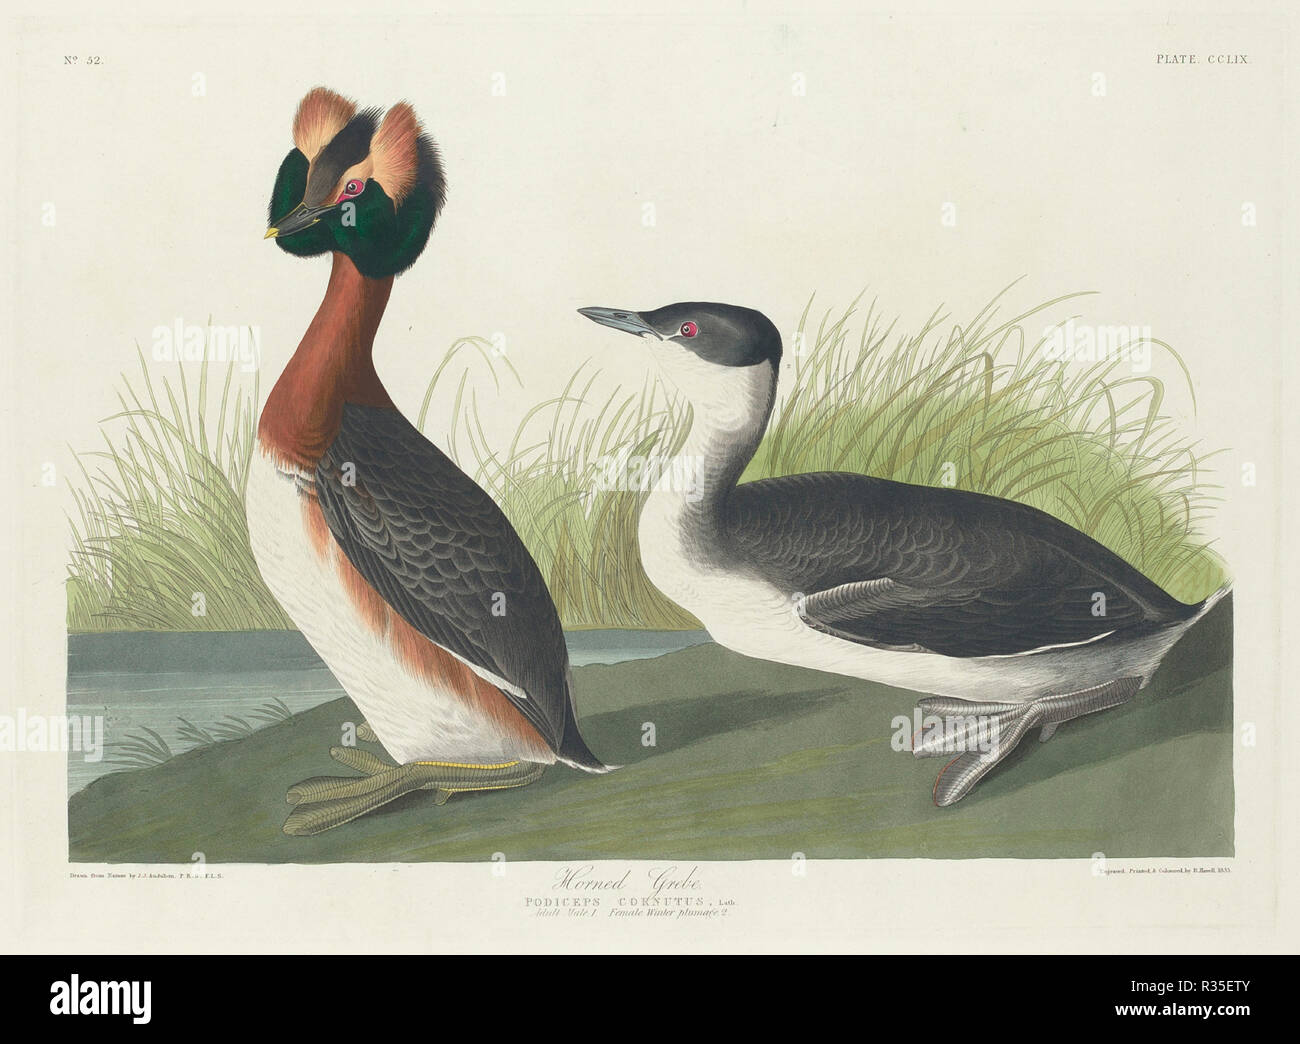 Horned Grebe. Dated: 1835. Medium: hand-colored etching and aquatint on Whatman paper. Museum: National Gallery of Art, Washington DC. Author: Robert Havell after John James Audubon. Stock Photo